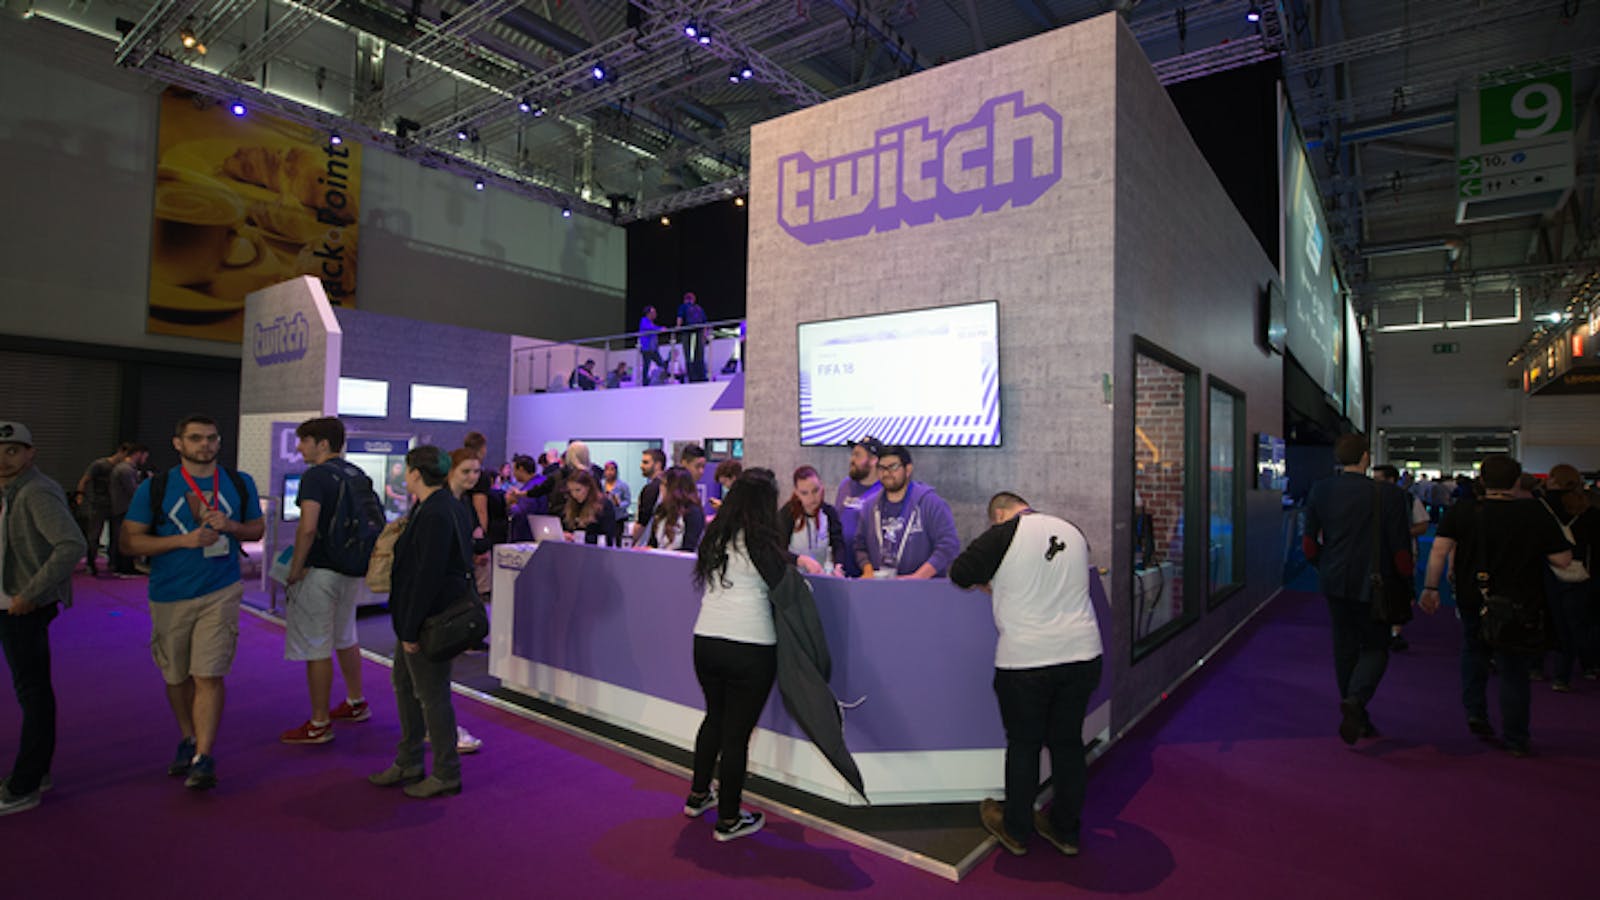 The 9 Most Popular Twitch Streamers